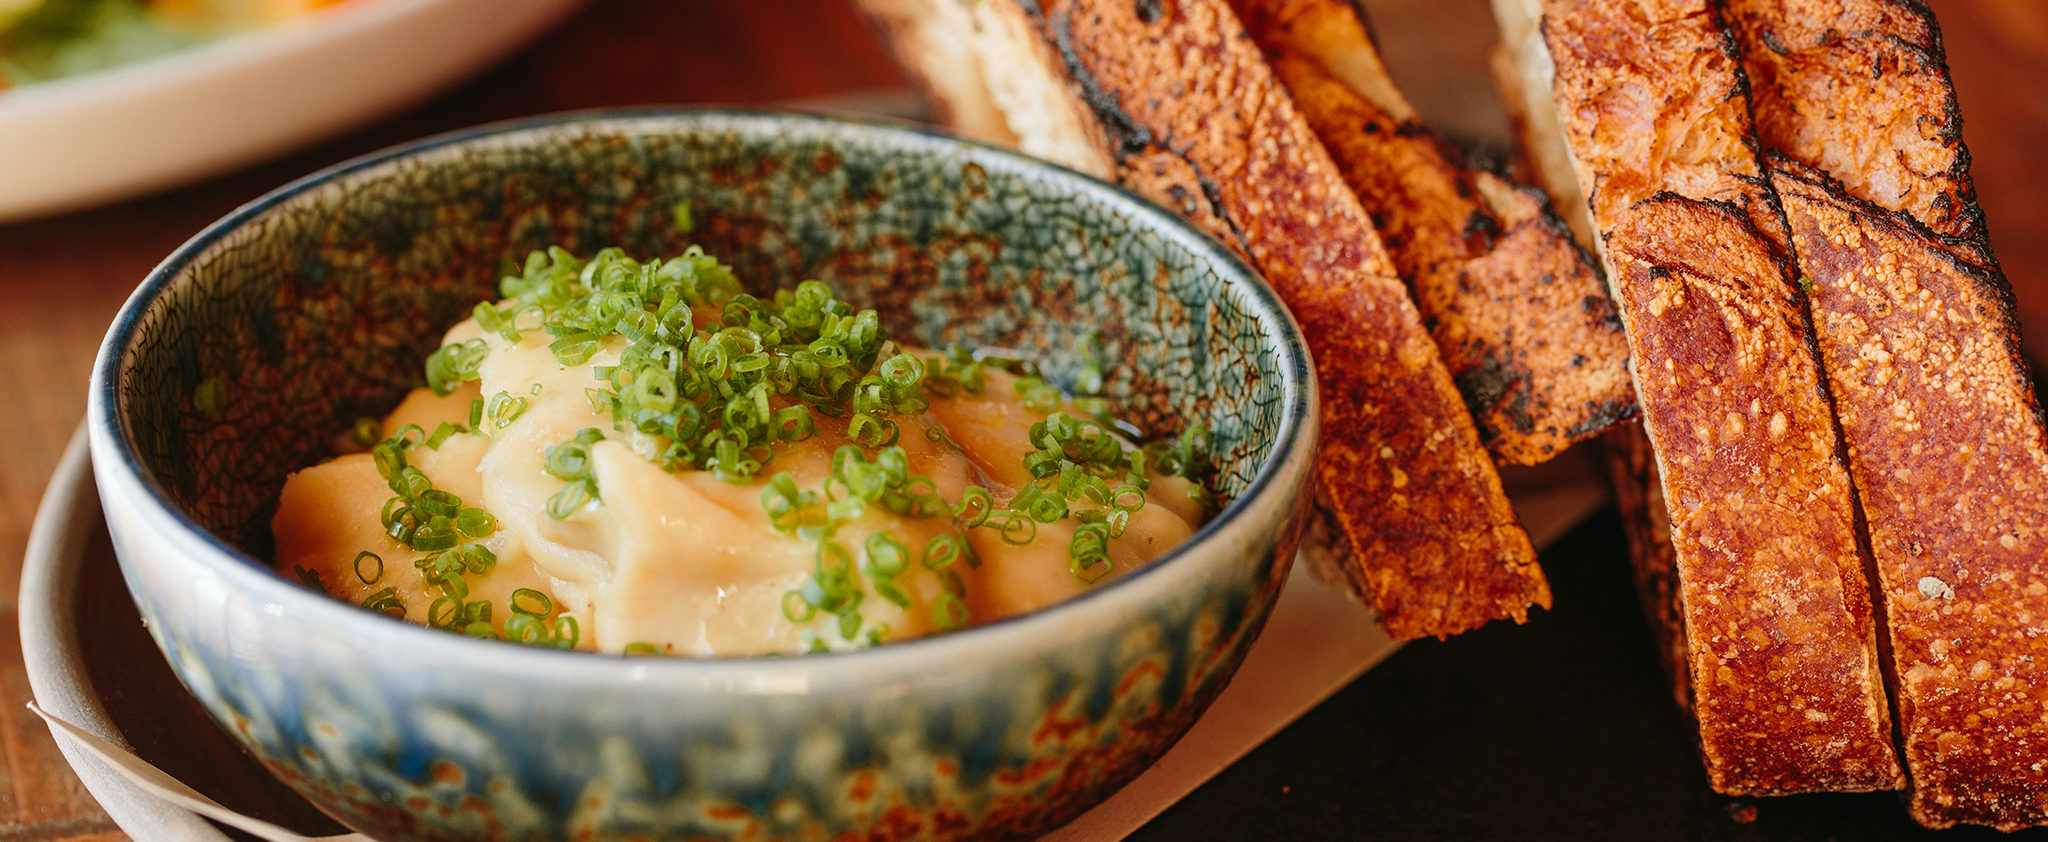 Smoked butter bean dip from Spoke Wine Bar